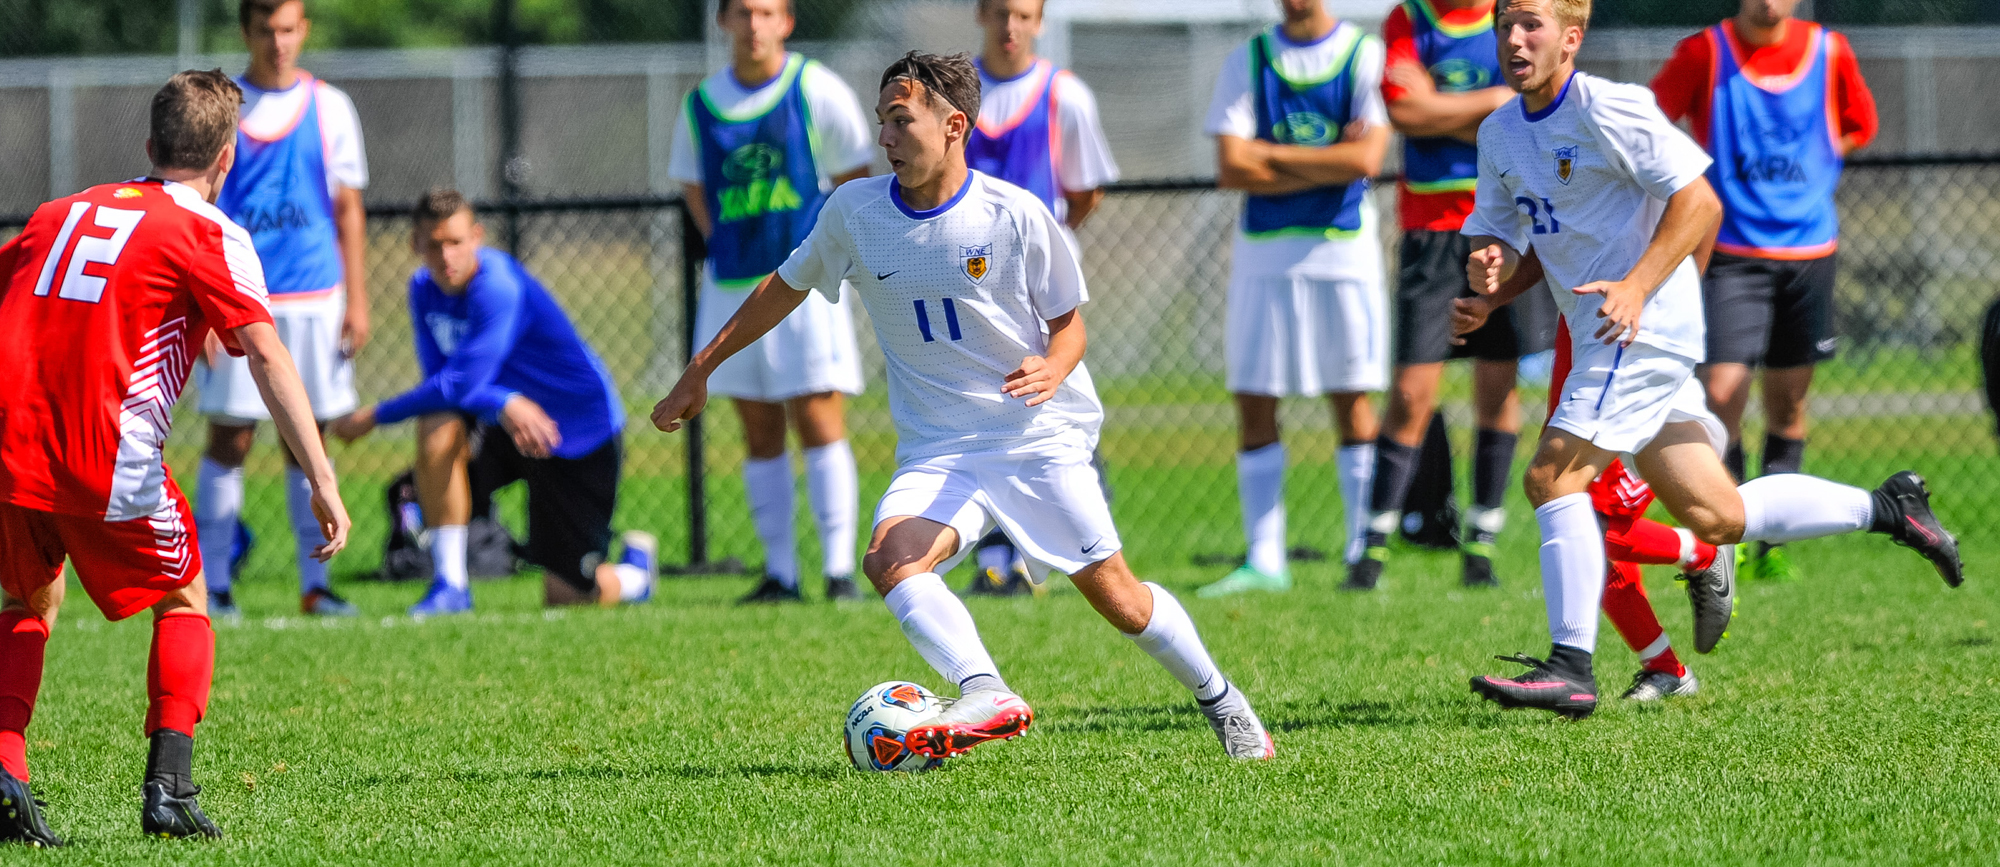 Pingree’s Second Half Goal Lifts Western New England to 1-0 Victory at Roger Williams